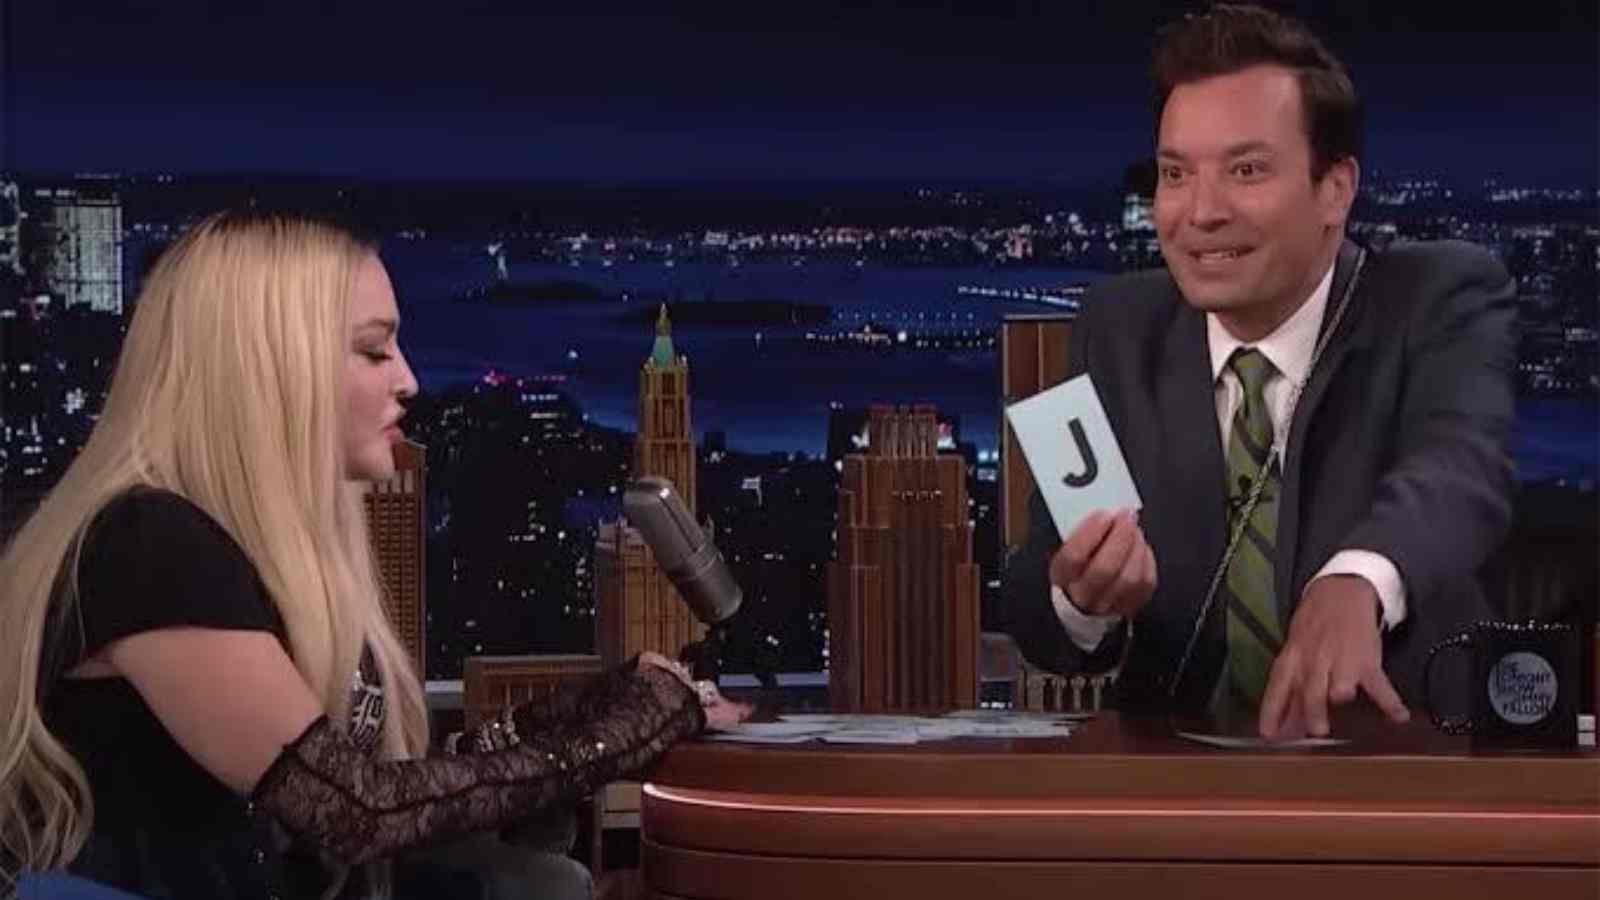 Madonna played a fun card game with Jimmy Fallon 